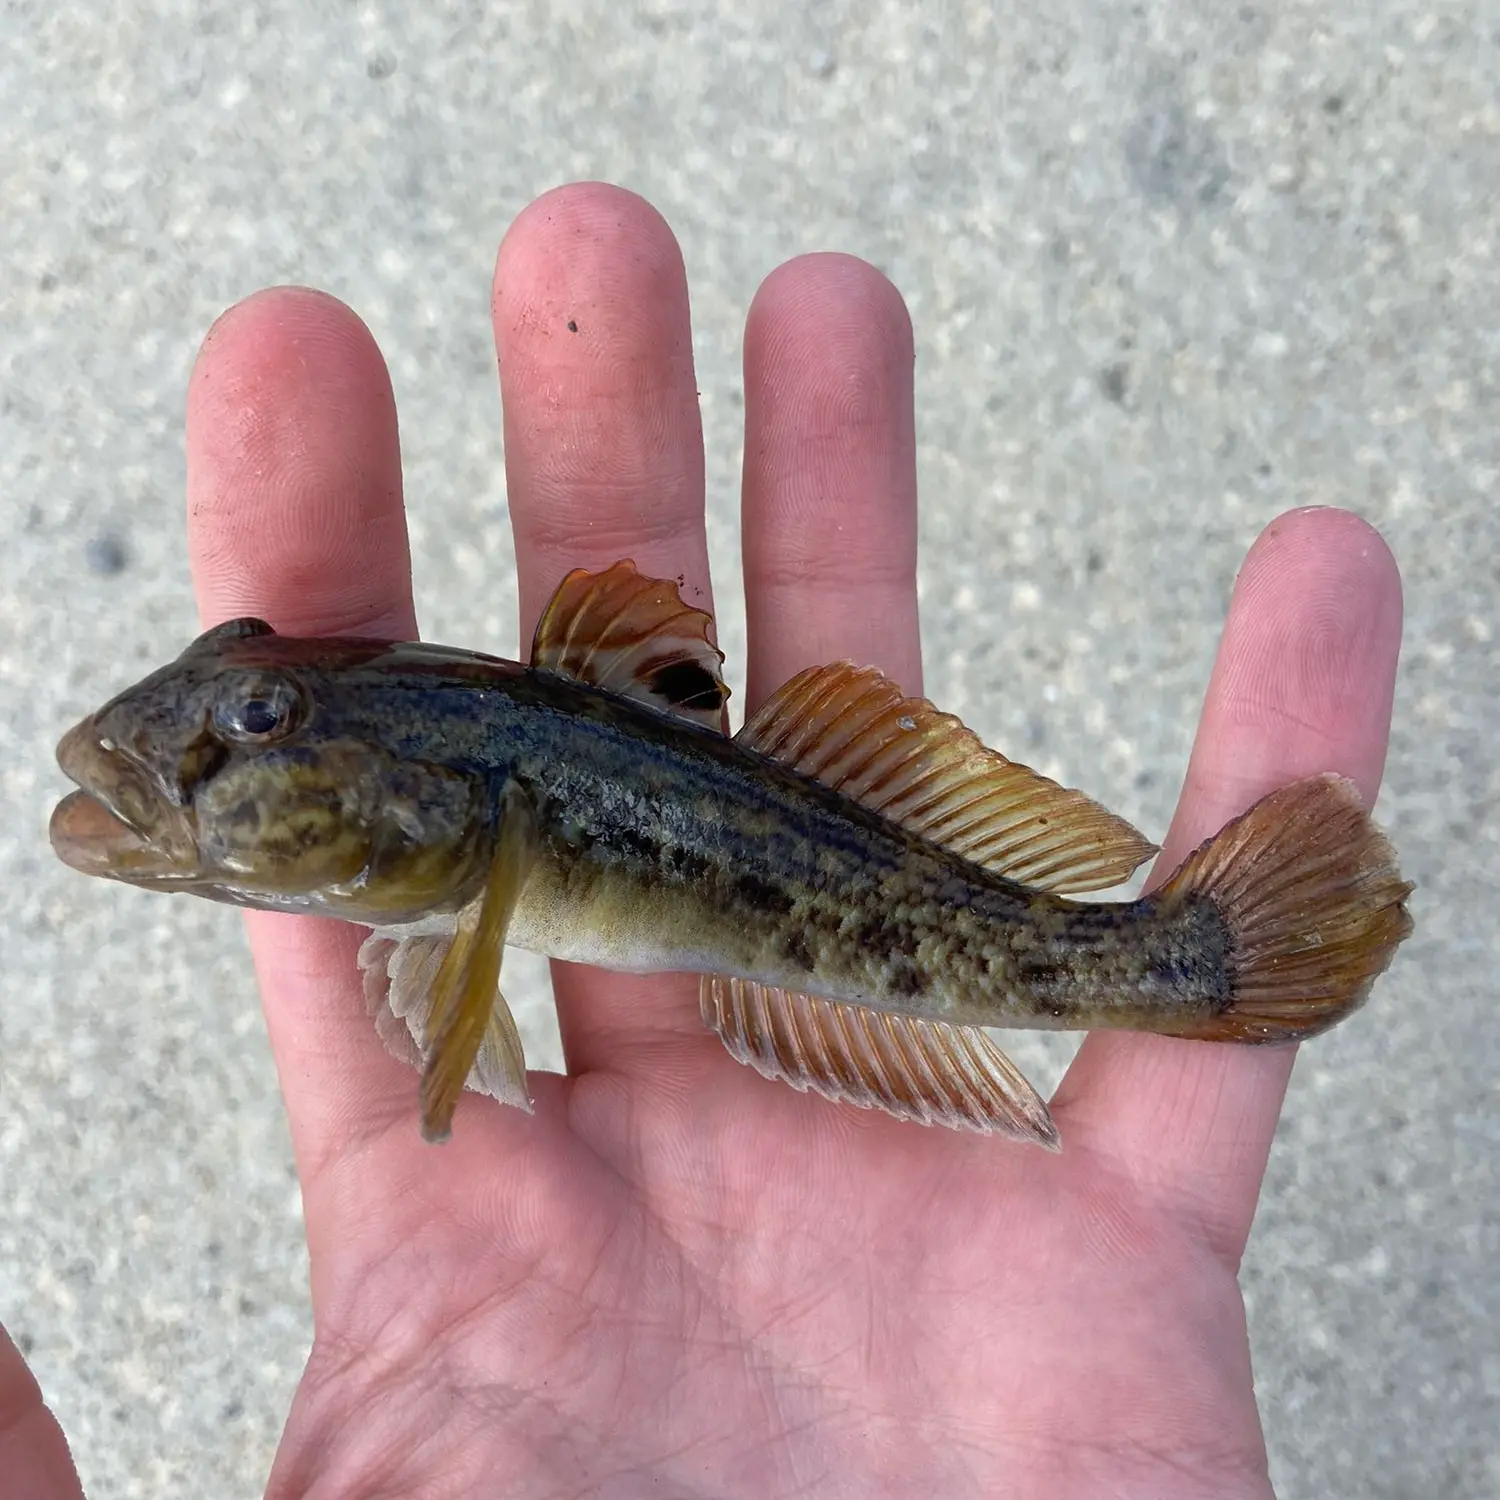 Fishing for Round goby near you